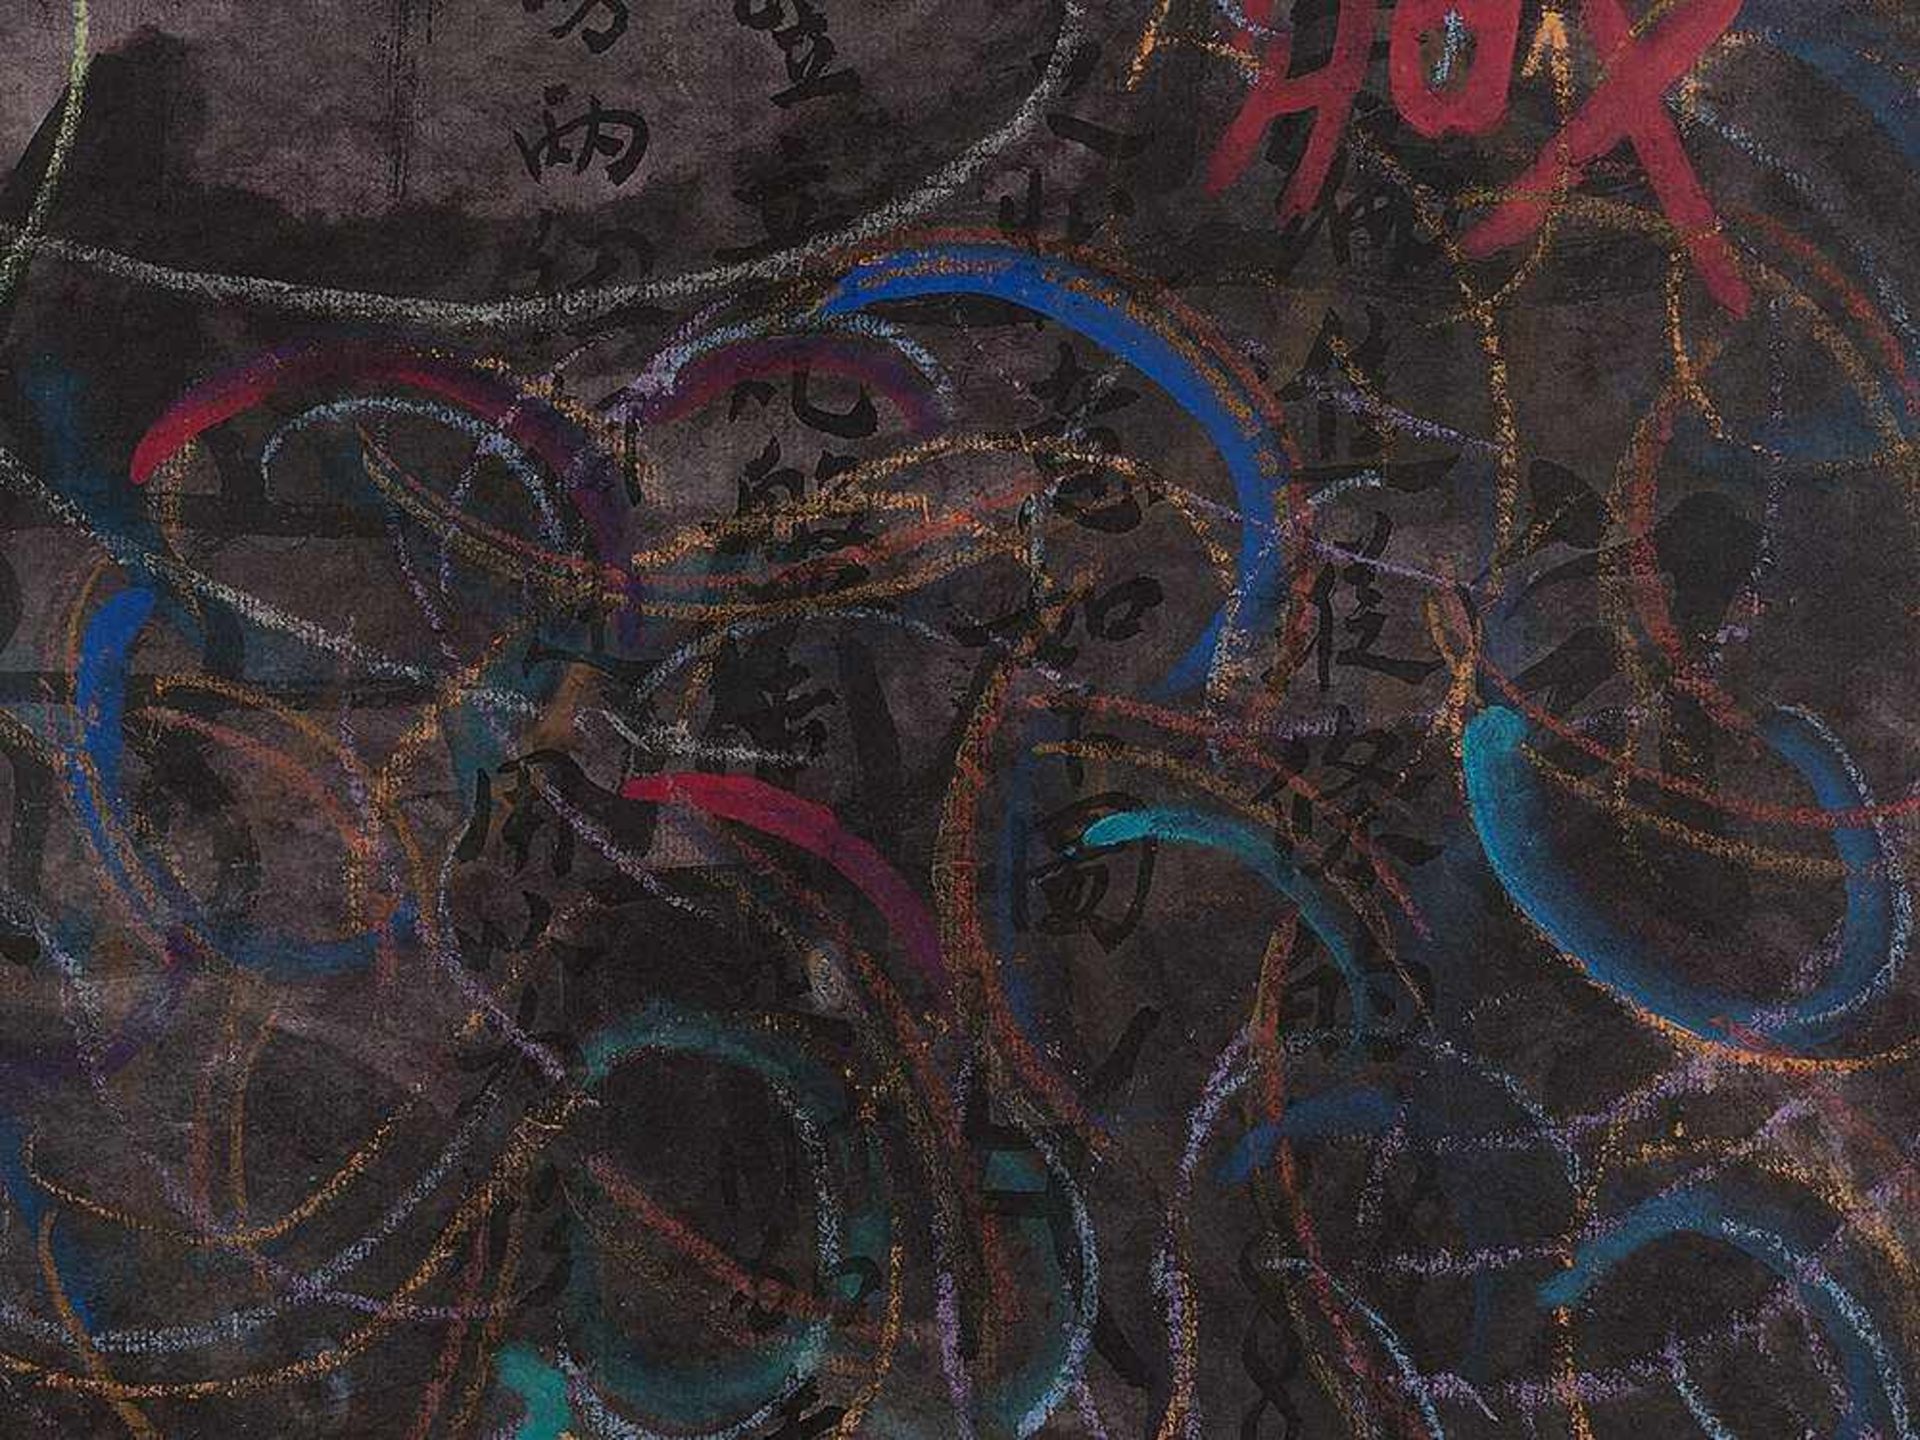 CHANG XIAOBING, PAINTING, CALLIGRAPHIC SIGNS Ink and colors on paper. China, 1991 This work by the - Bild 6 aus 8